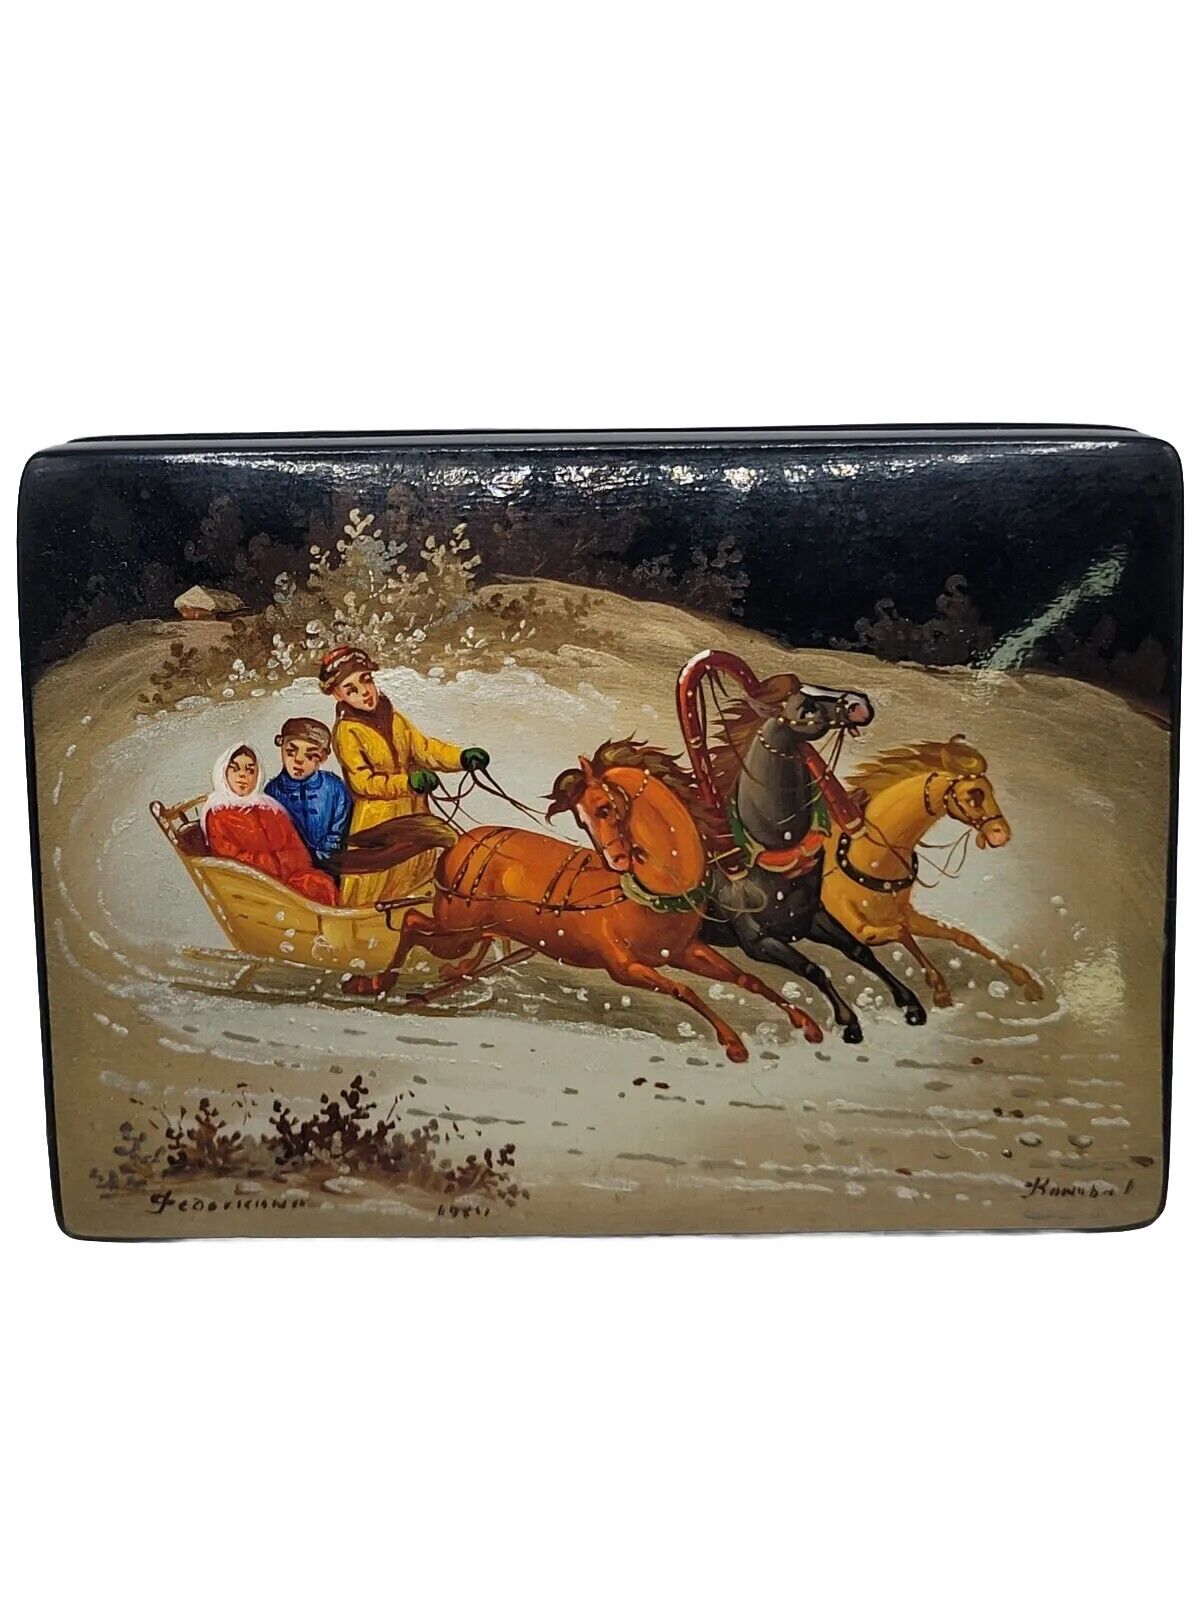 Vintage Russian Lacquer Box Hinged Winter Troika Sleigh Scene signed dated 1984